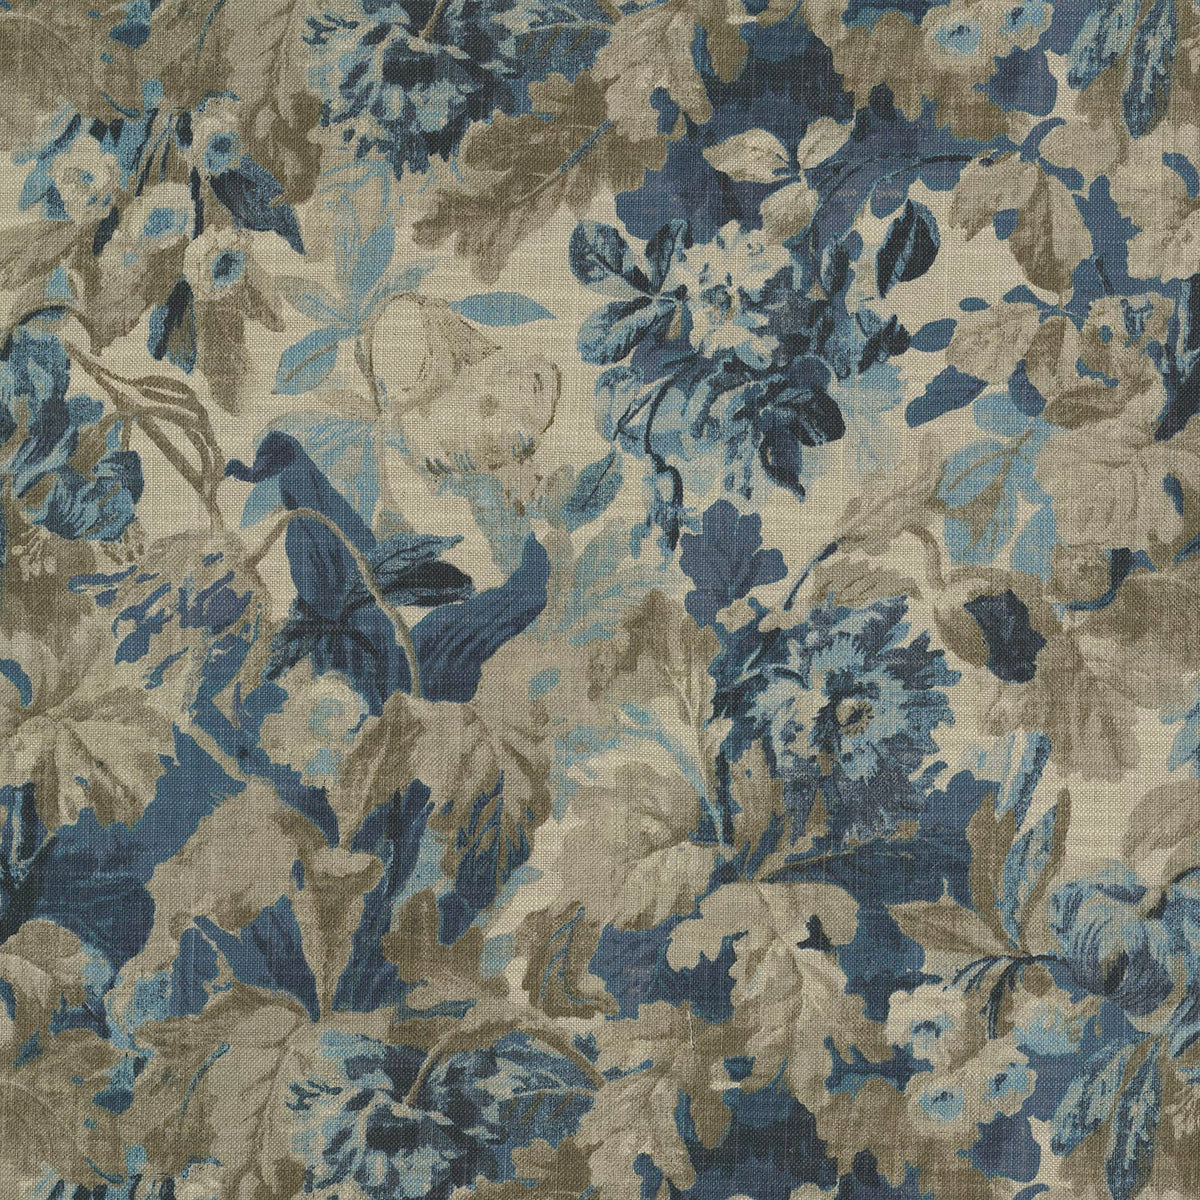 Waverly Eloise - Delft 682172 Fabric Swatch